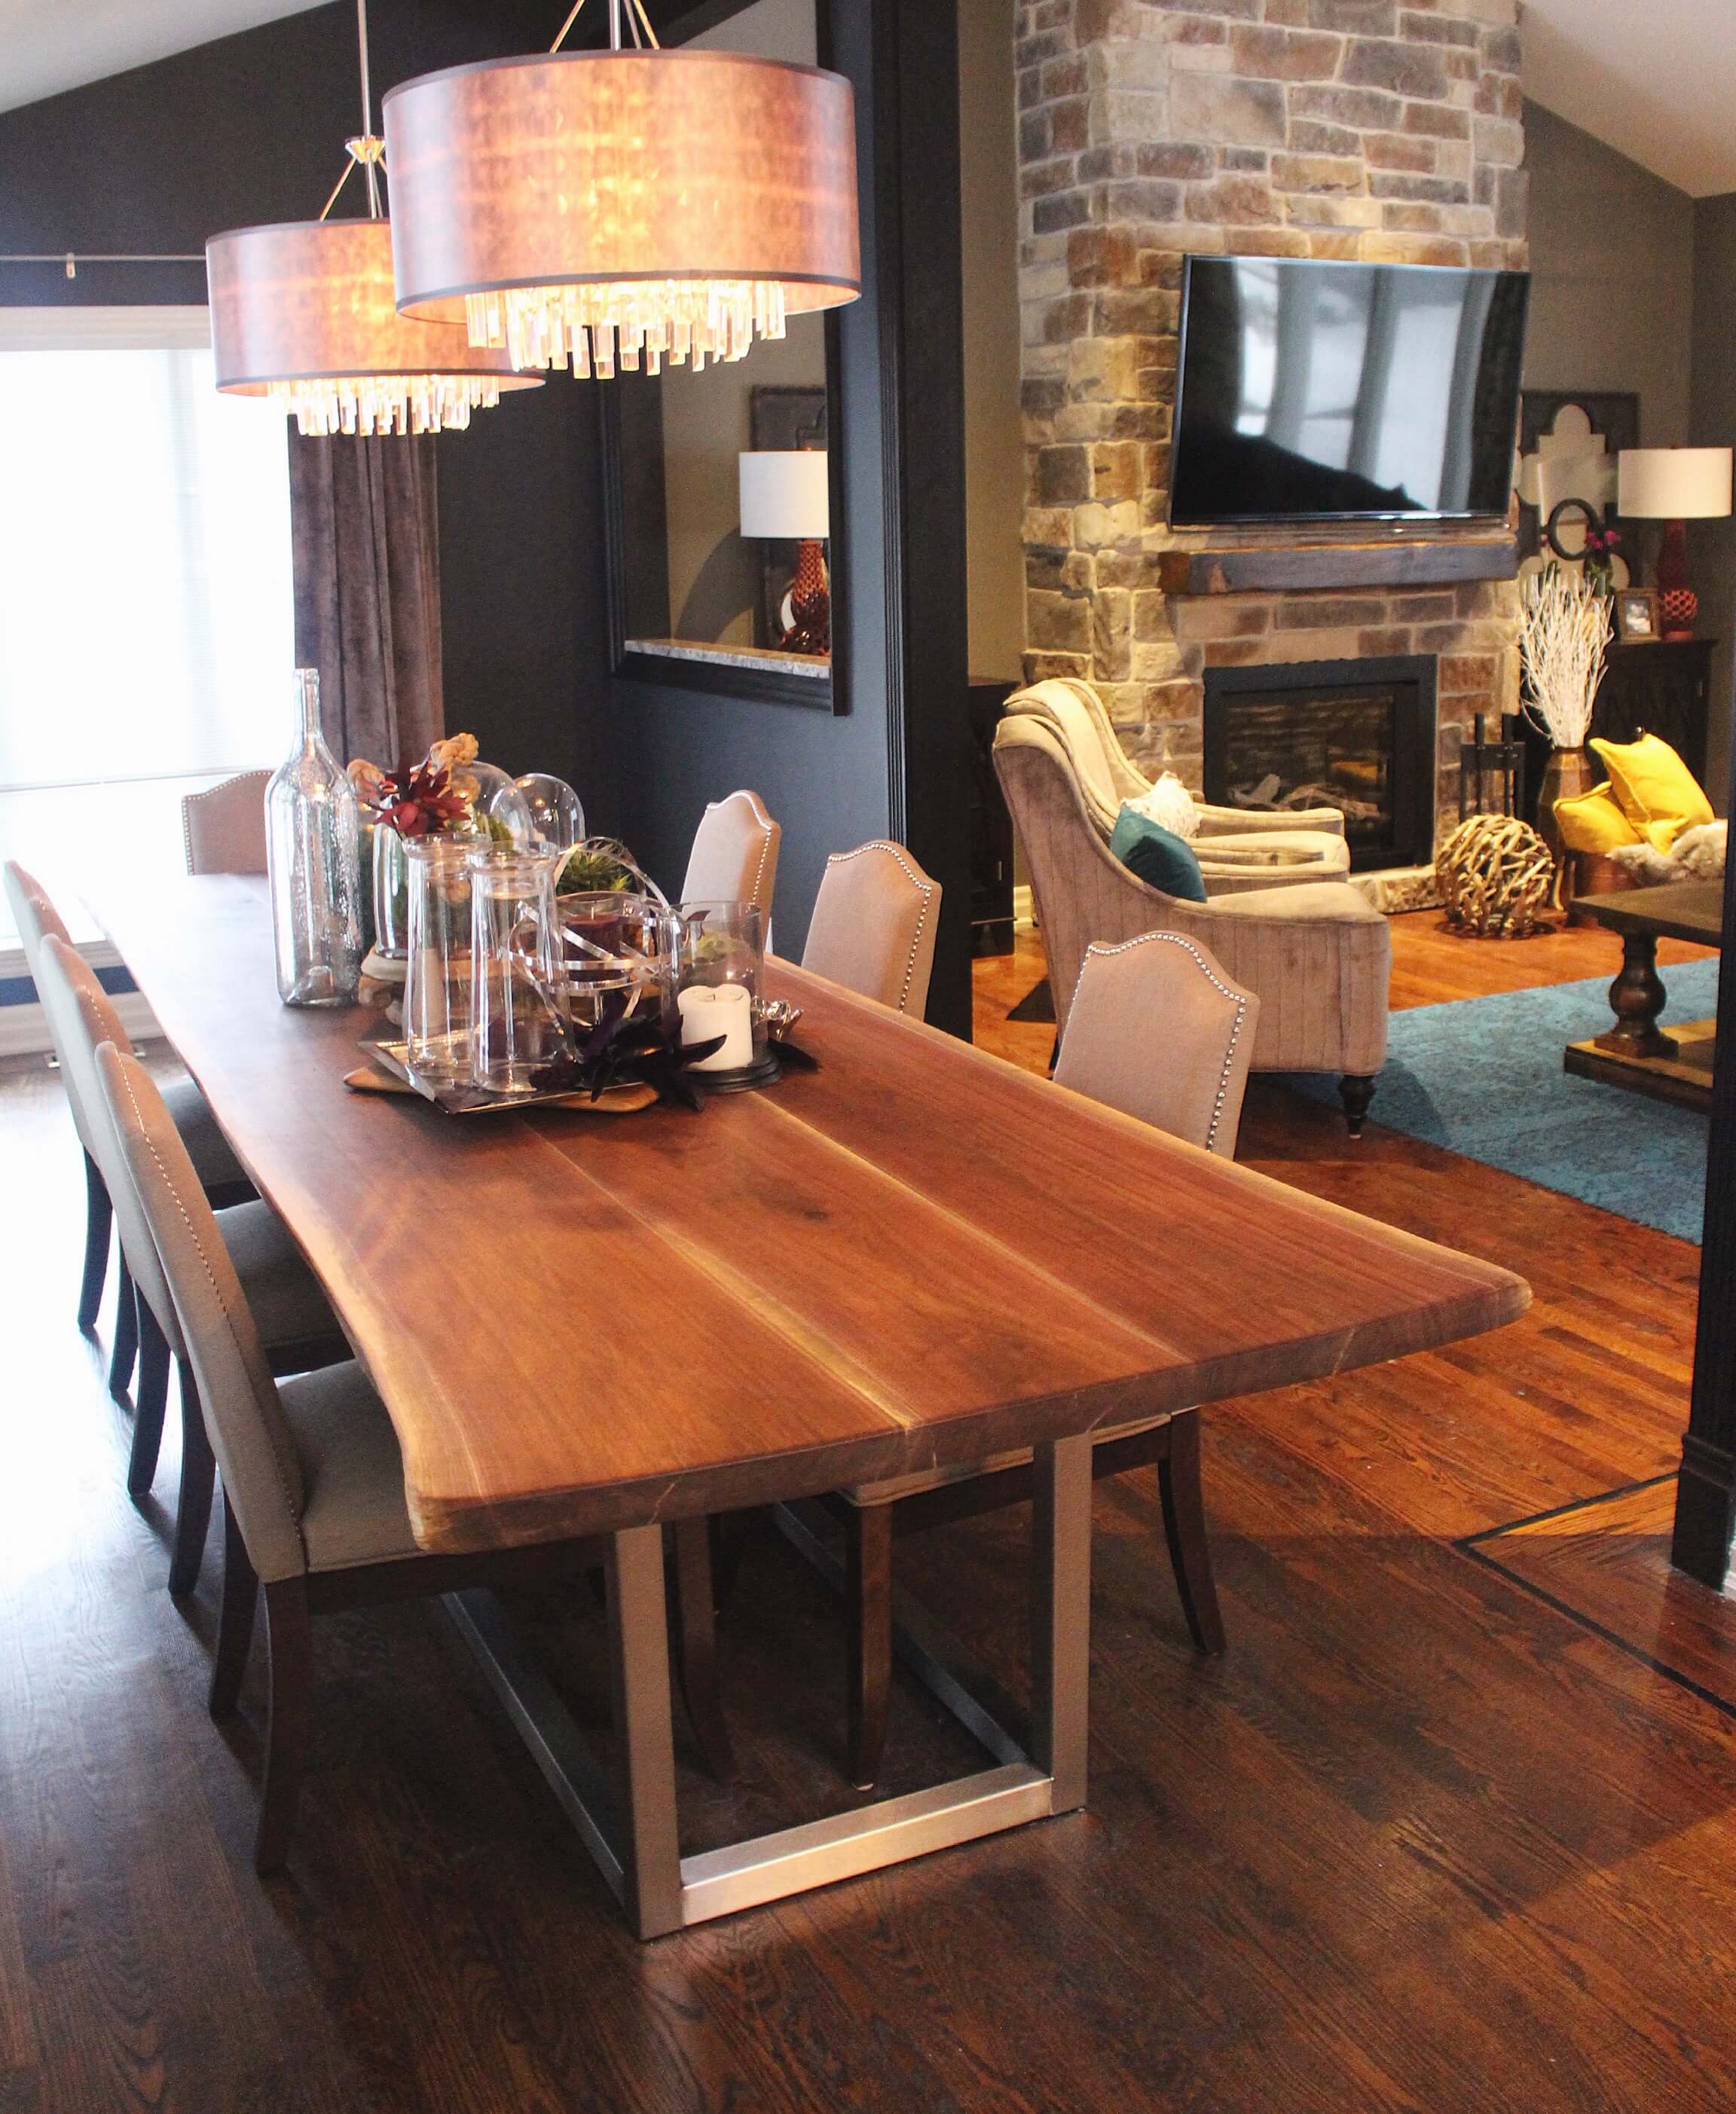 Live edge black walnut table on The Property Brothers